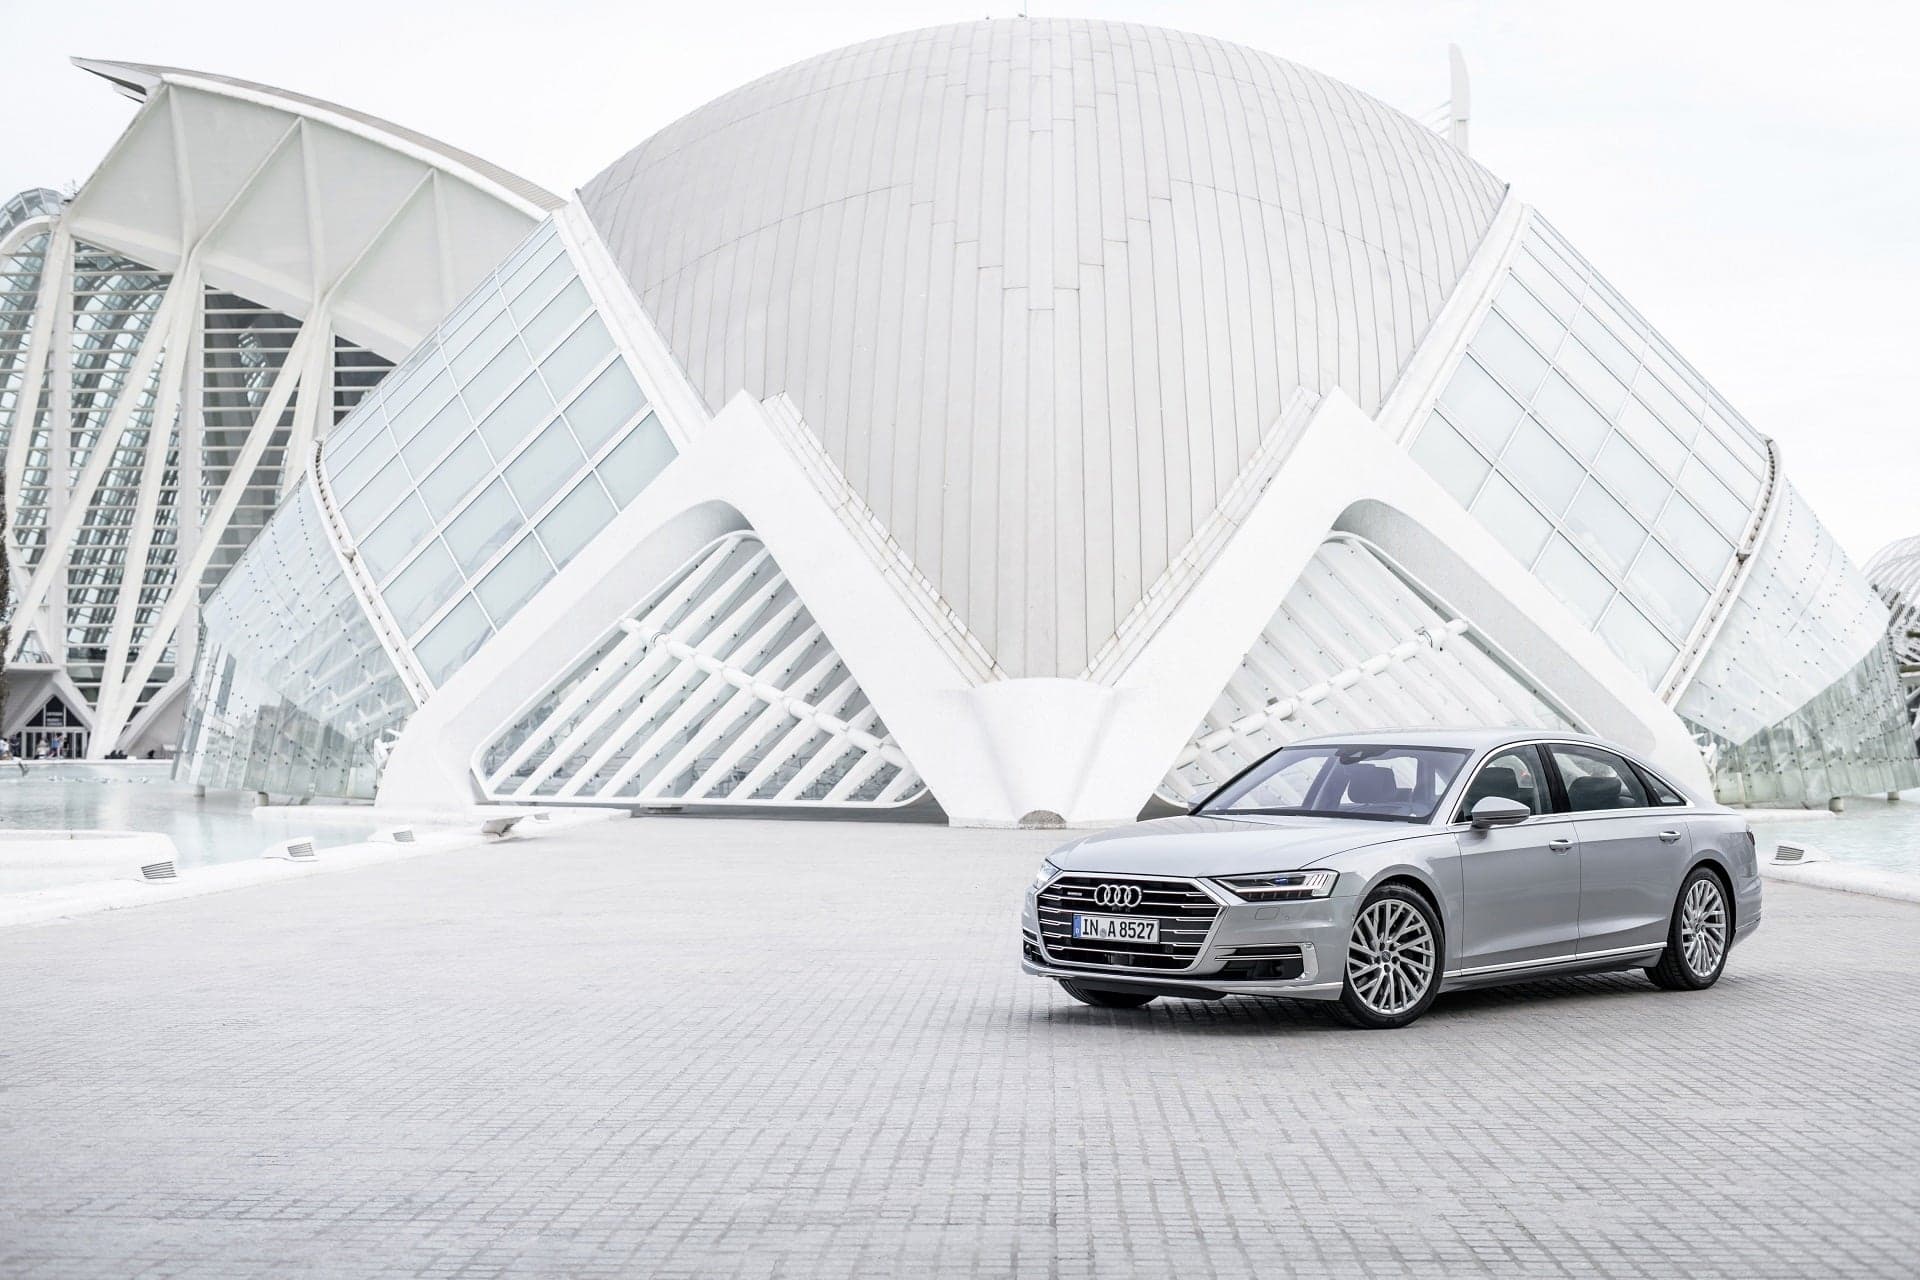 Audi to Debut Fourth-Generation A8 at LA Auto Show